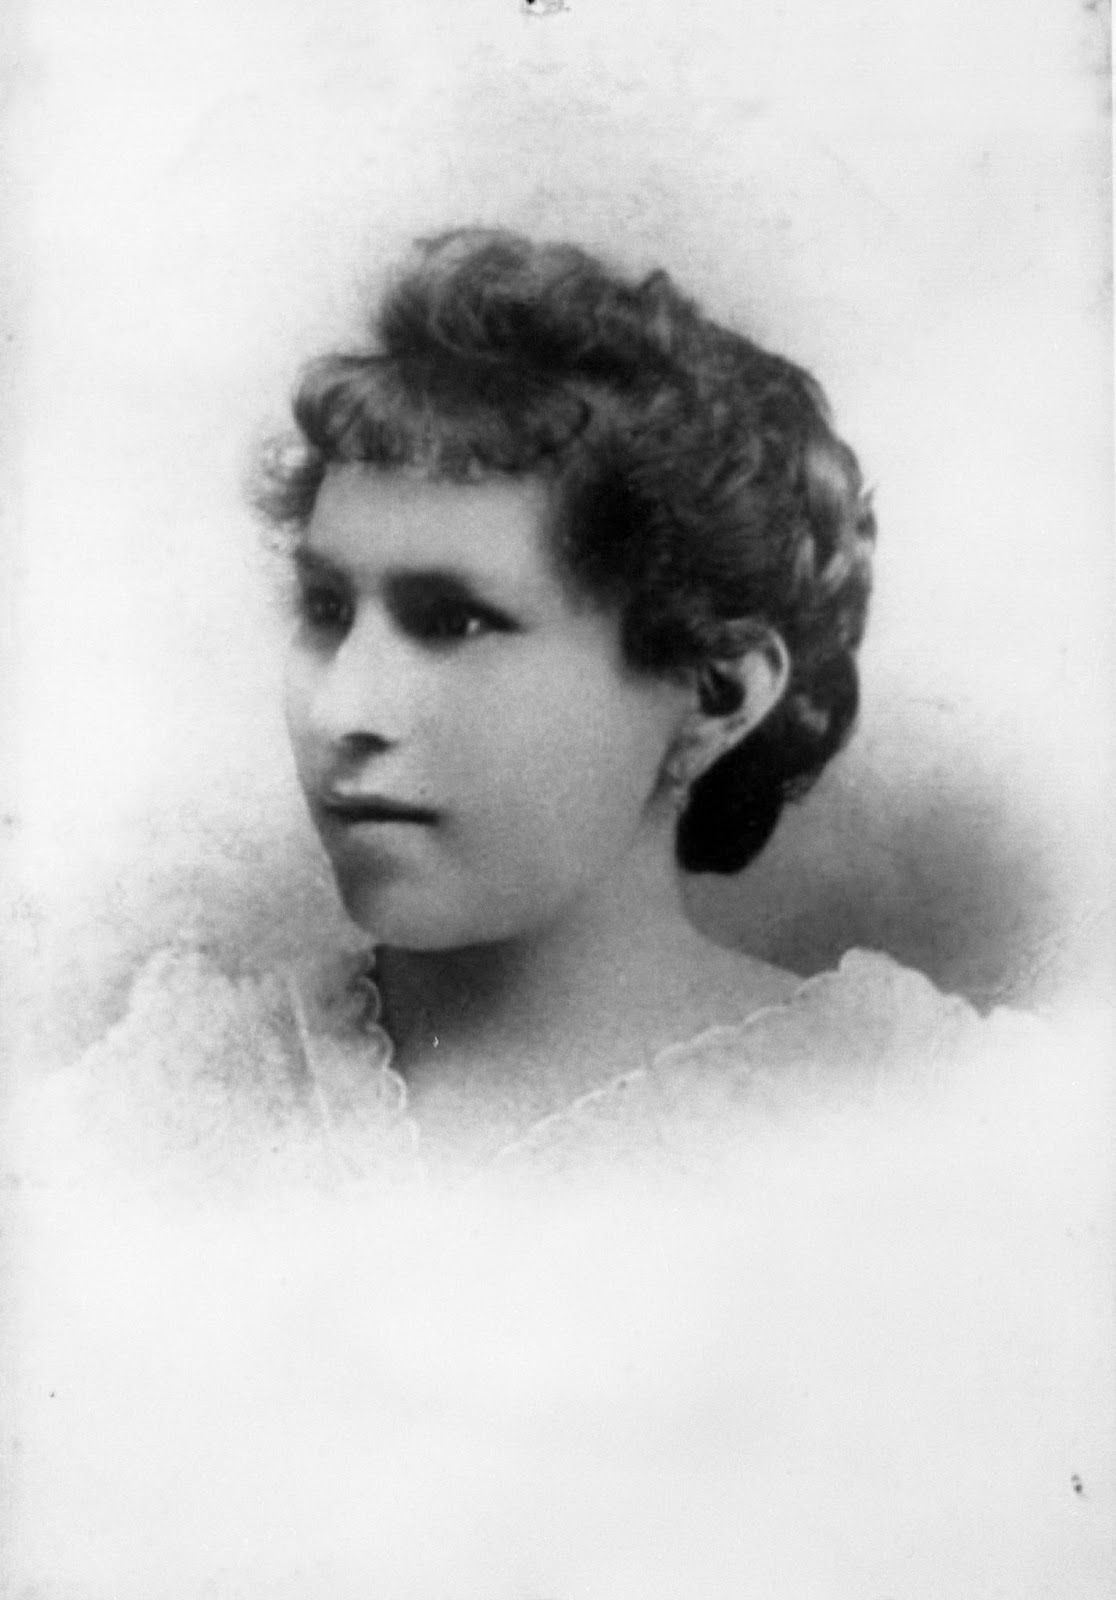 Rachael is looking to the left of the camera.  She has dark eyes and dark hair.  Her hair has short, curly bangs and is up in a bun.  She is wearing a white v-neck shirt with scalloped edging. The image has an oval vignette border fading as you move further out from the center.